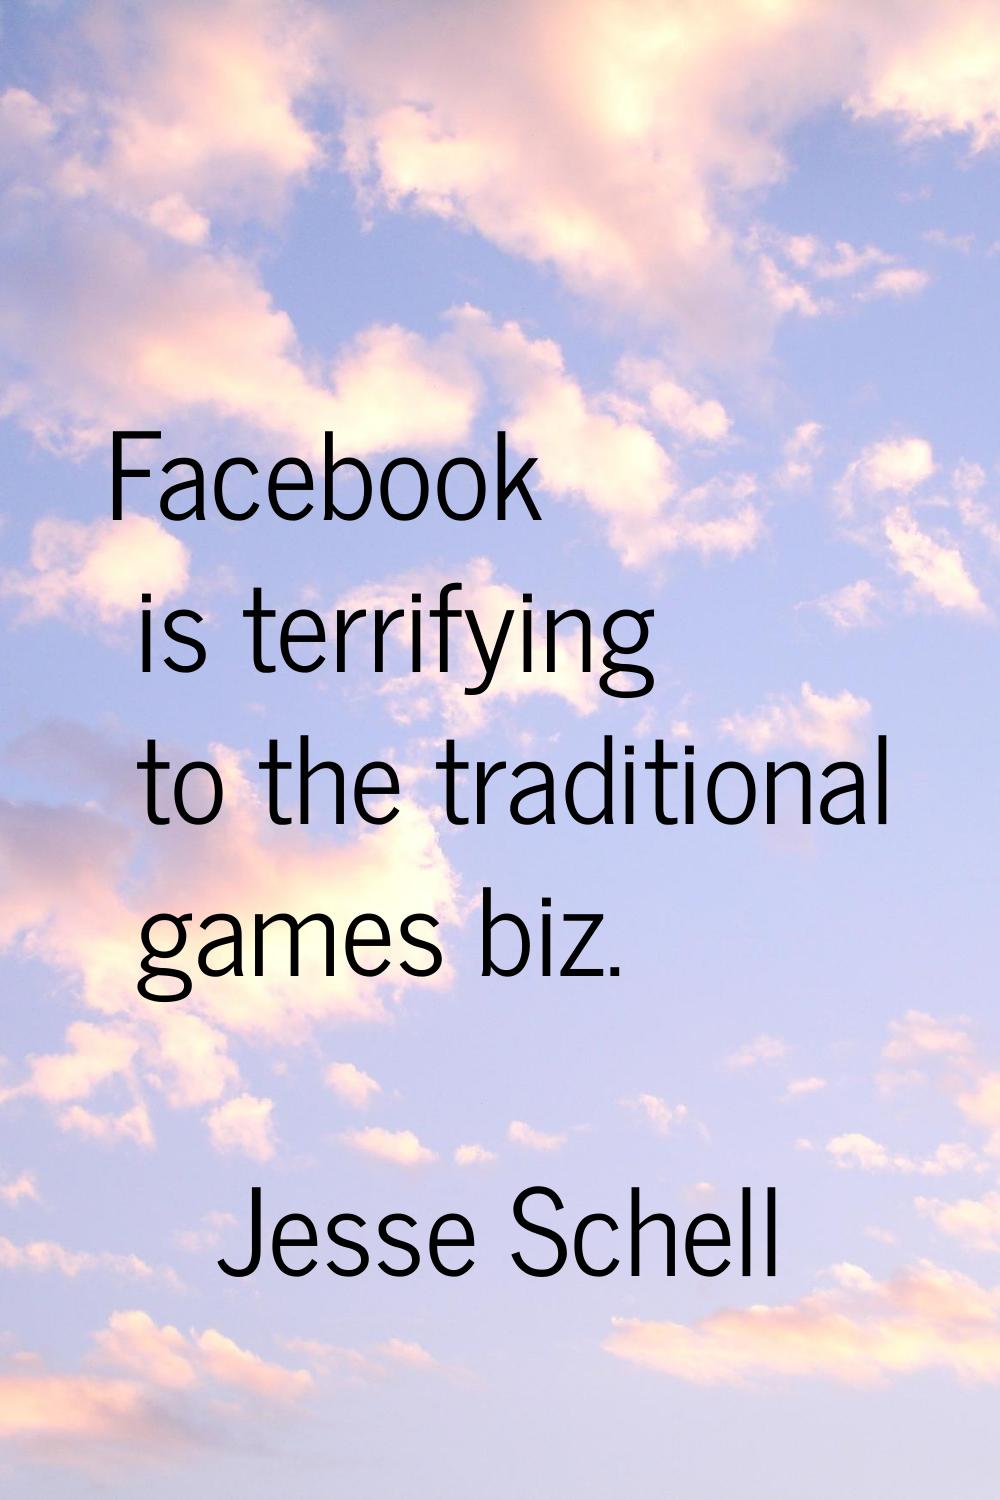 Facebook is terrifying to the traditional games biz.